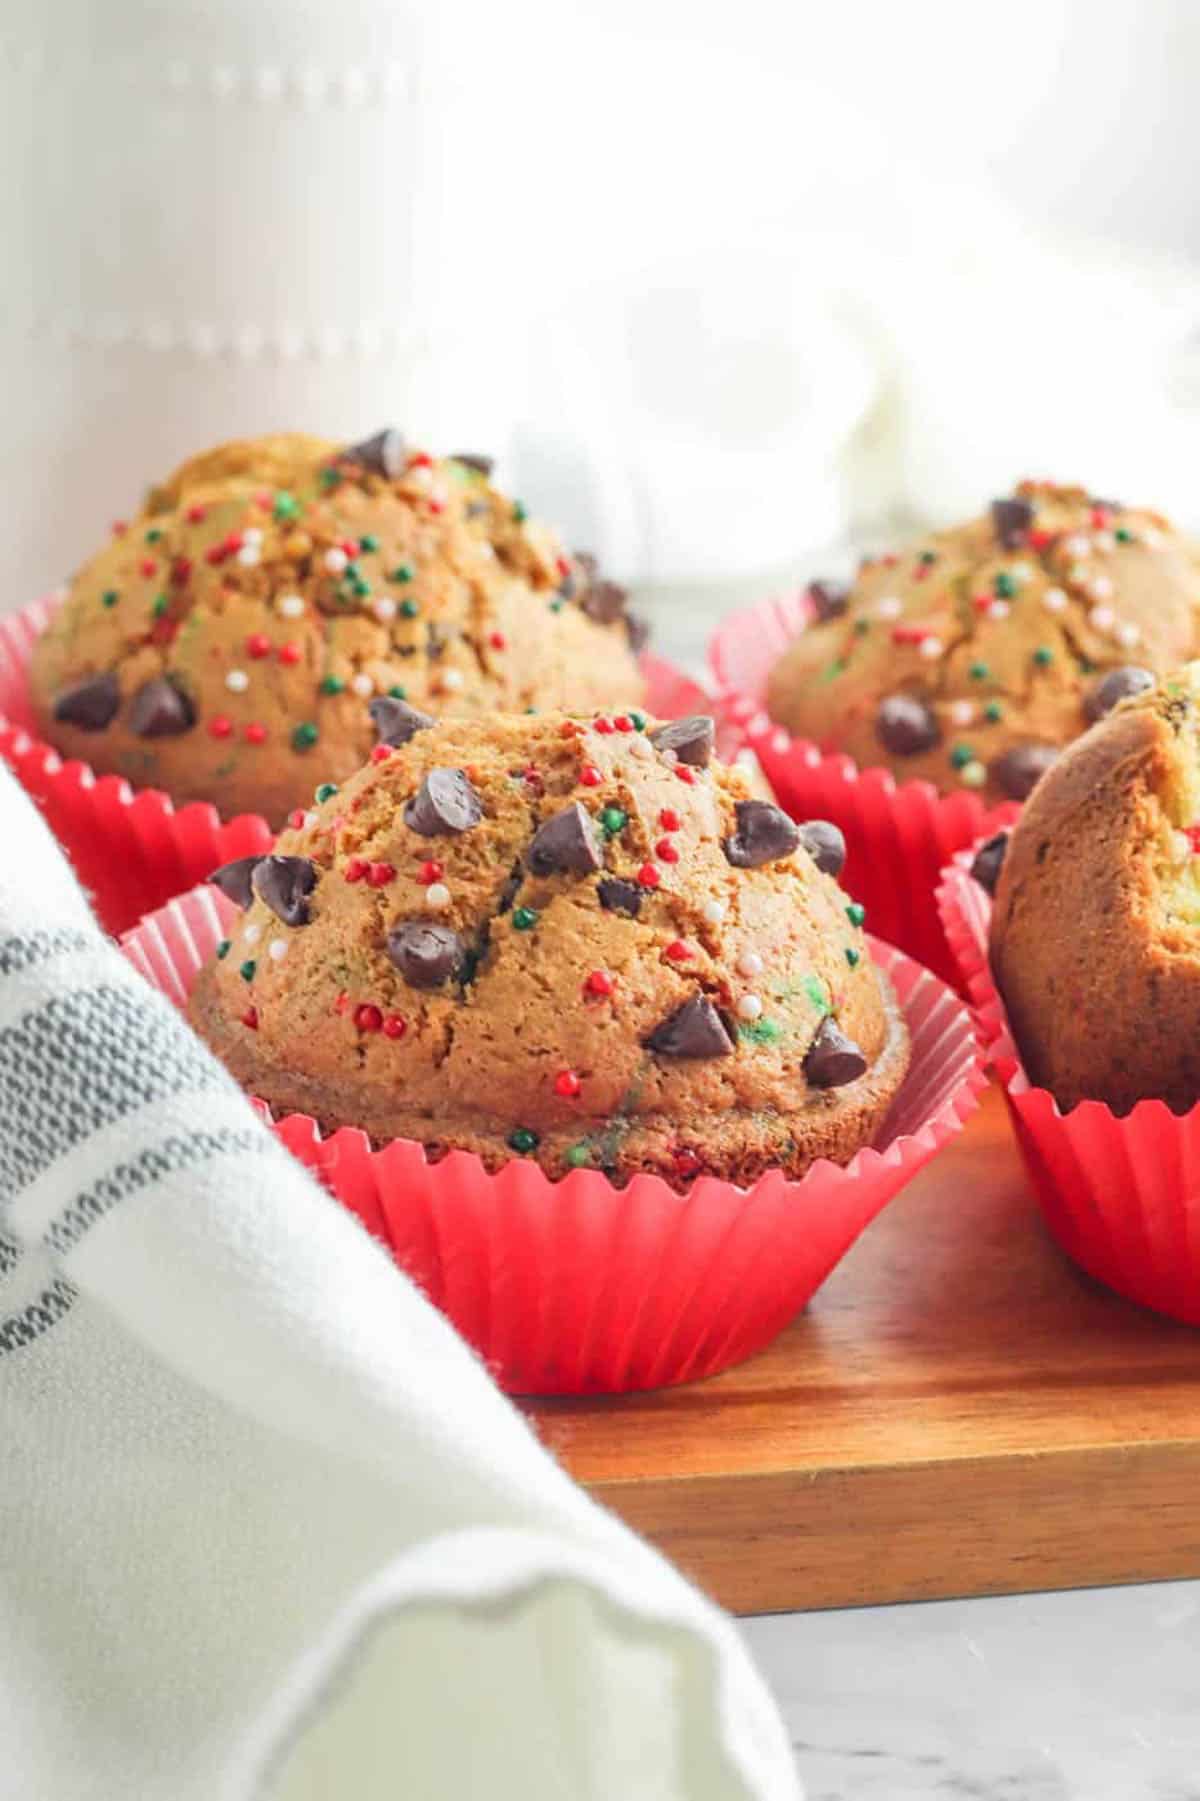 Christmas muffins with chocolate chips on a wooden cutting board.